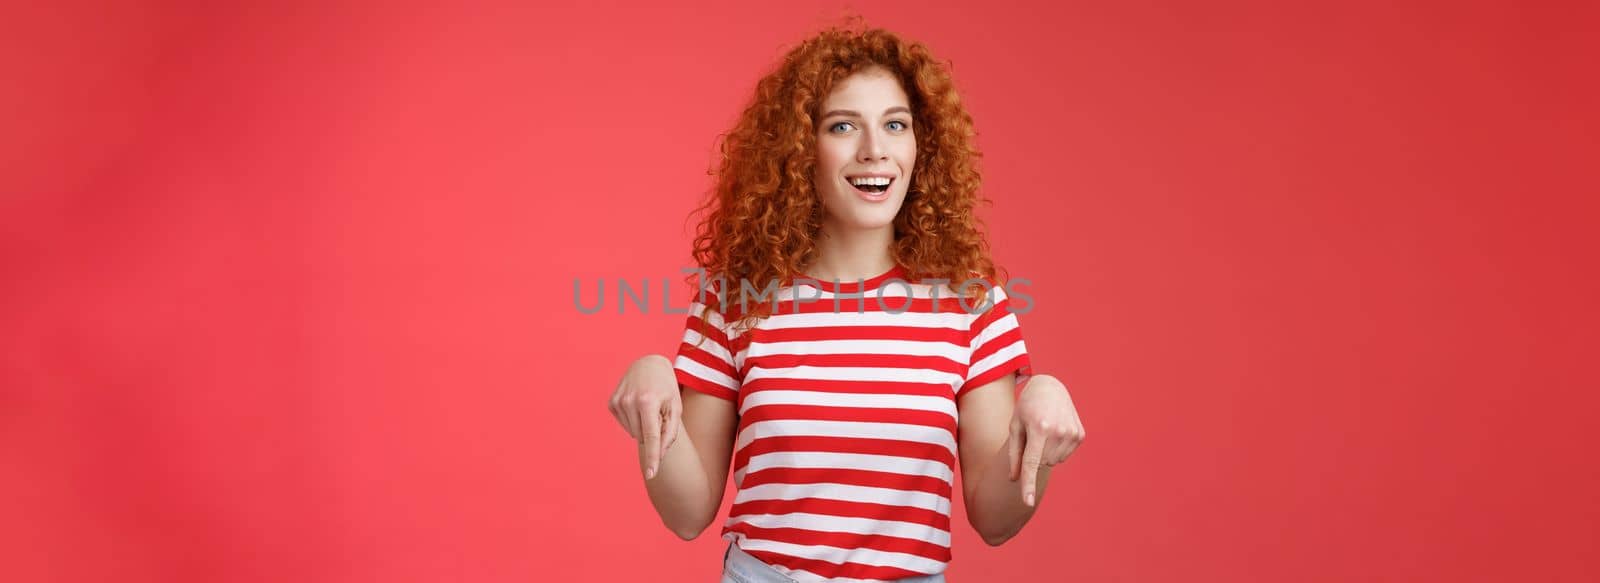 Hey check it out friend. Sassy good-looking cheeky redhead stylish girlfriend curly hairstyle wear summer t-shirt pointing down index finger smiling amused delighted present awesome recommendation.